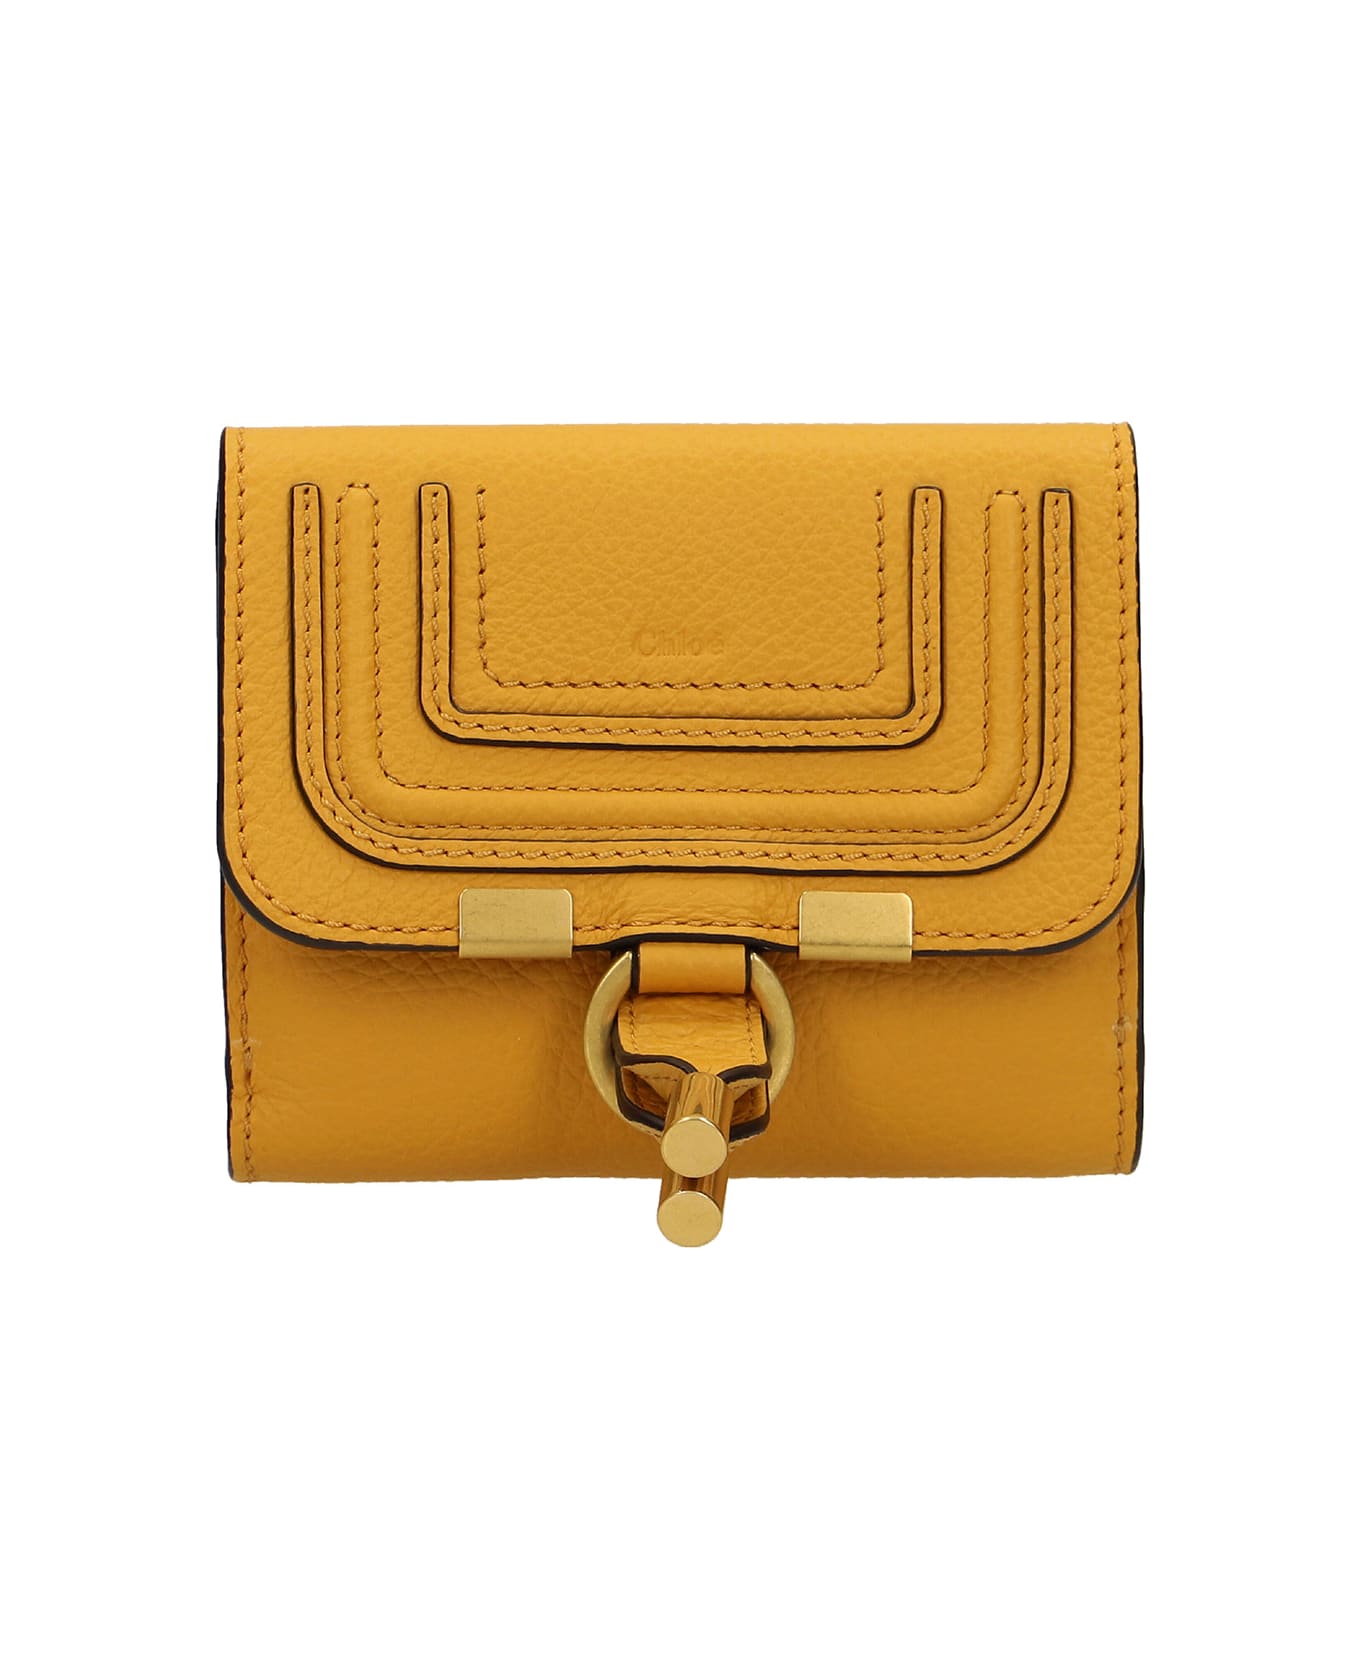 Chloé Marcie Wallet In Yellow Leather - yellow